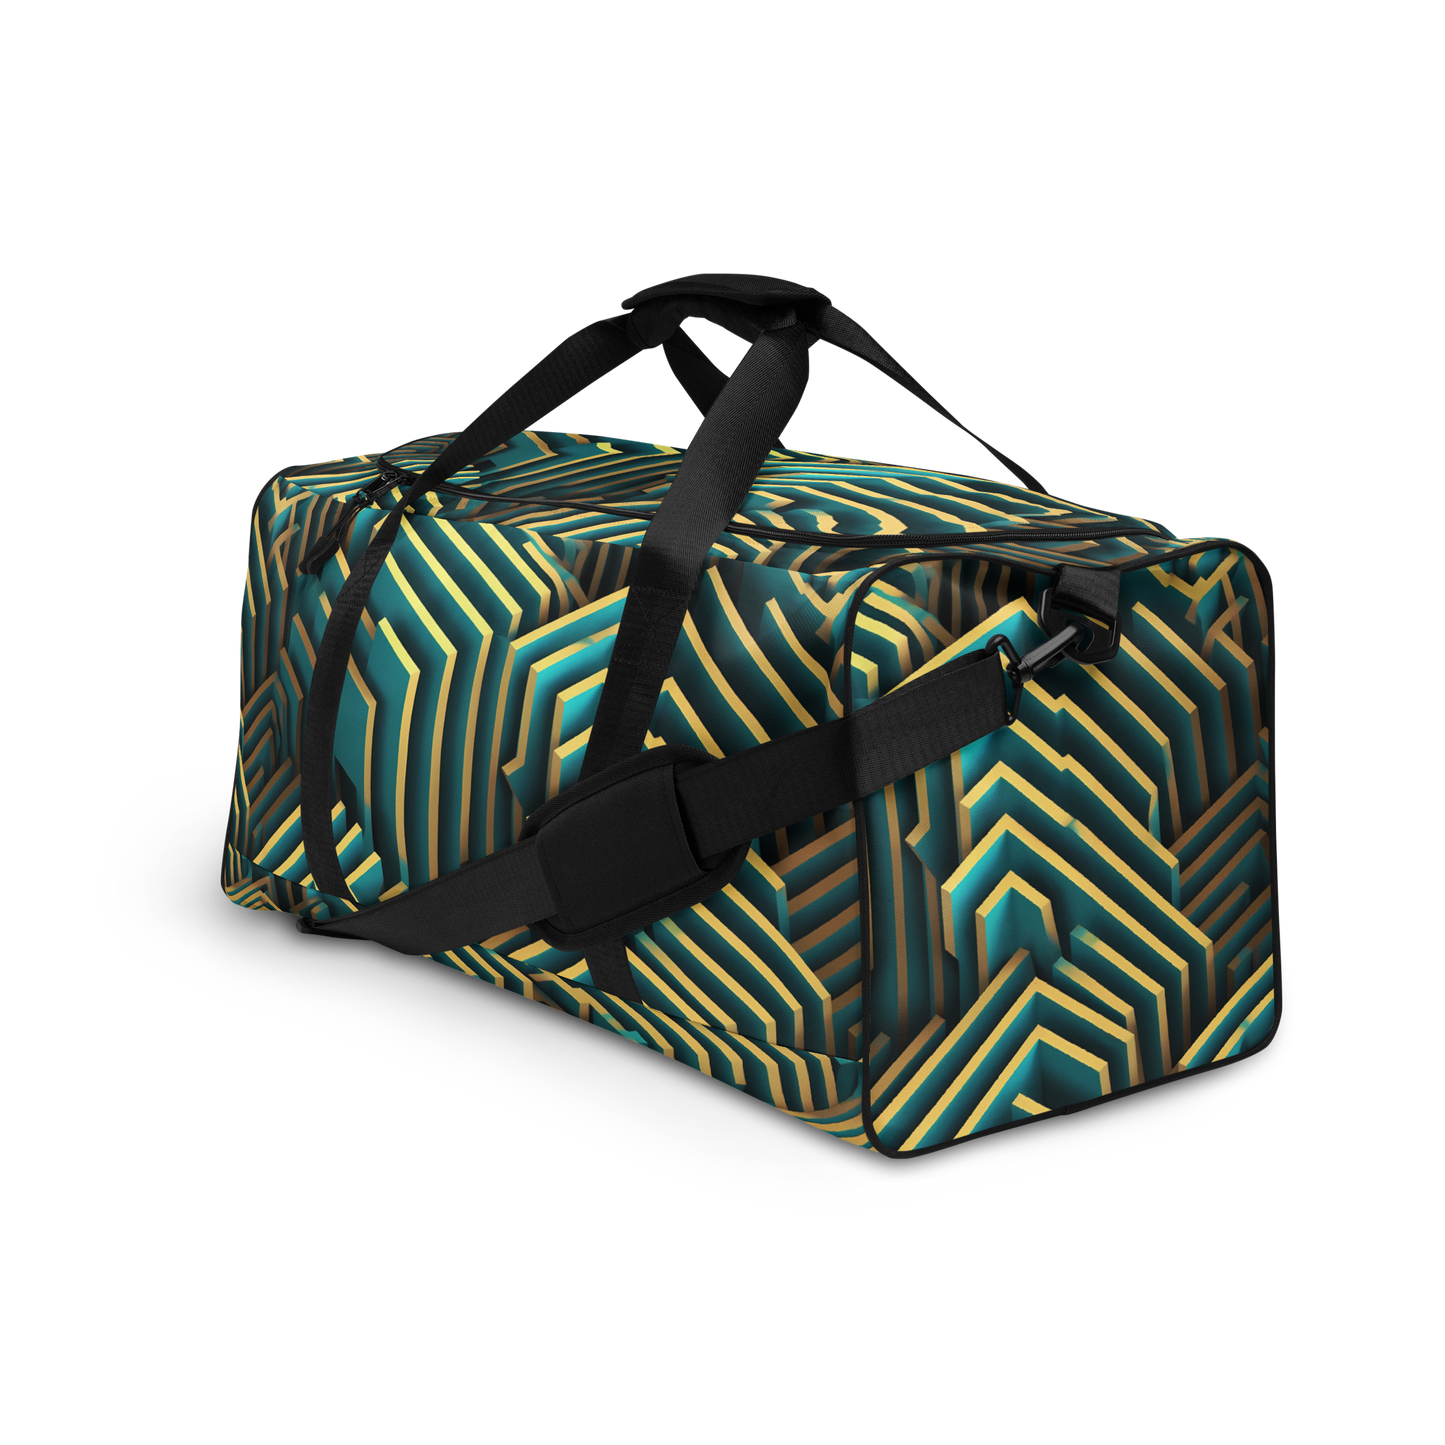 3D Maze Illusion | 3D Patterns | All-Over Print Duffle Bag - #5